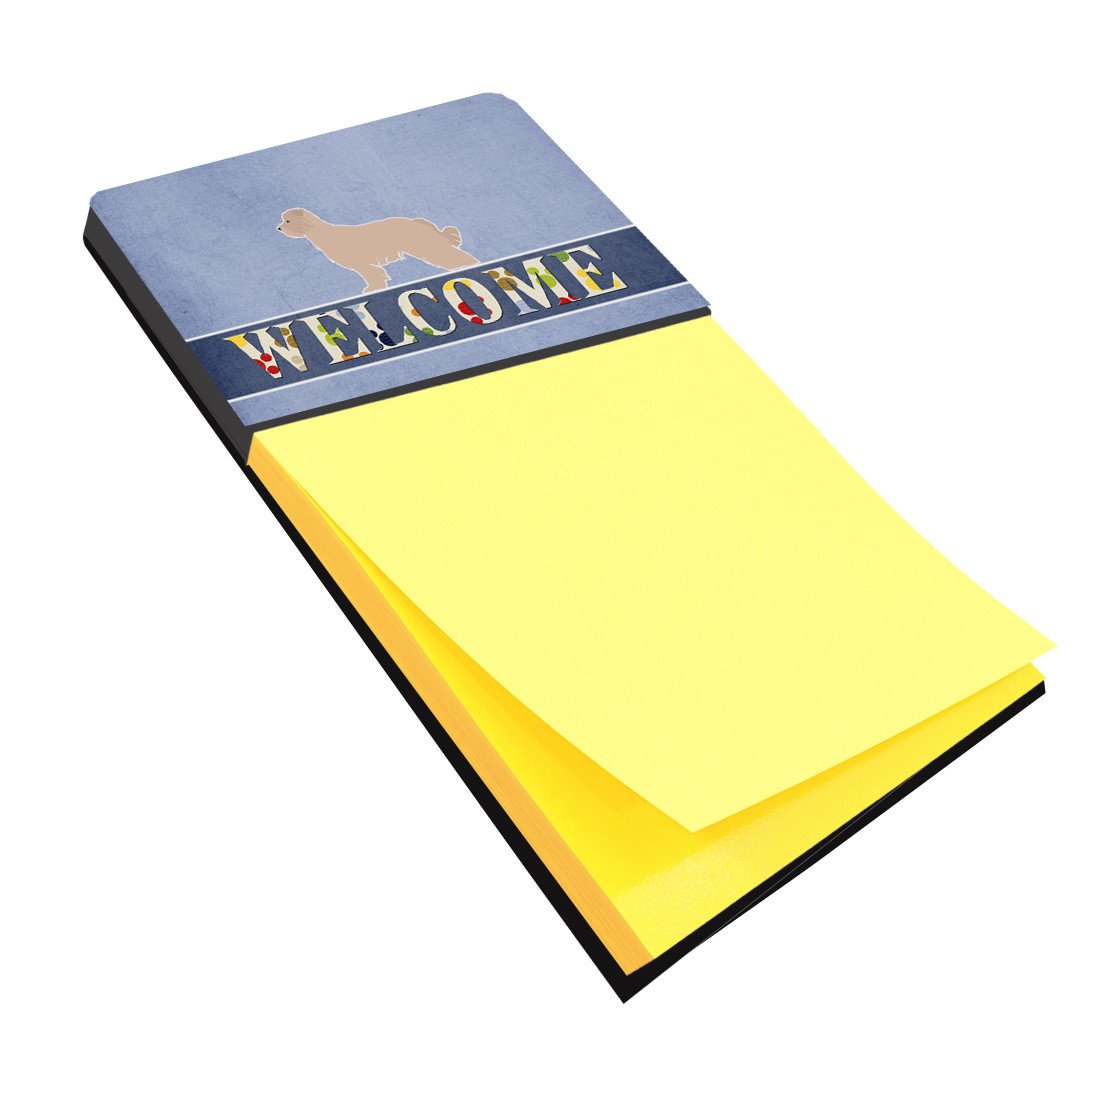 Pyrenean Shepherd Welcome Sticky Note Holder BB5522SN by Caroline's Treasures